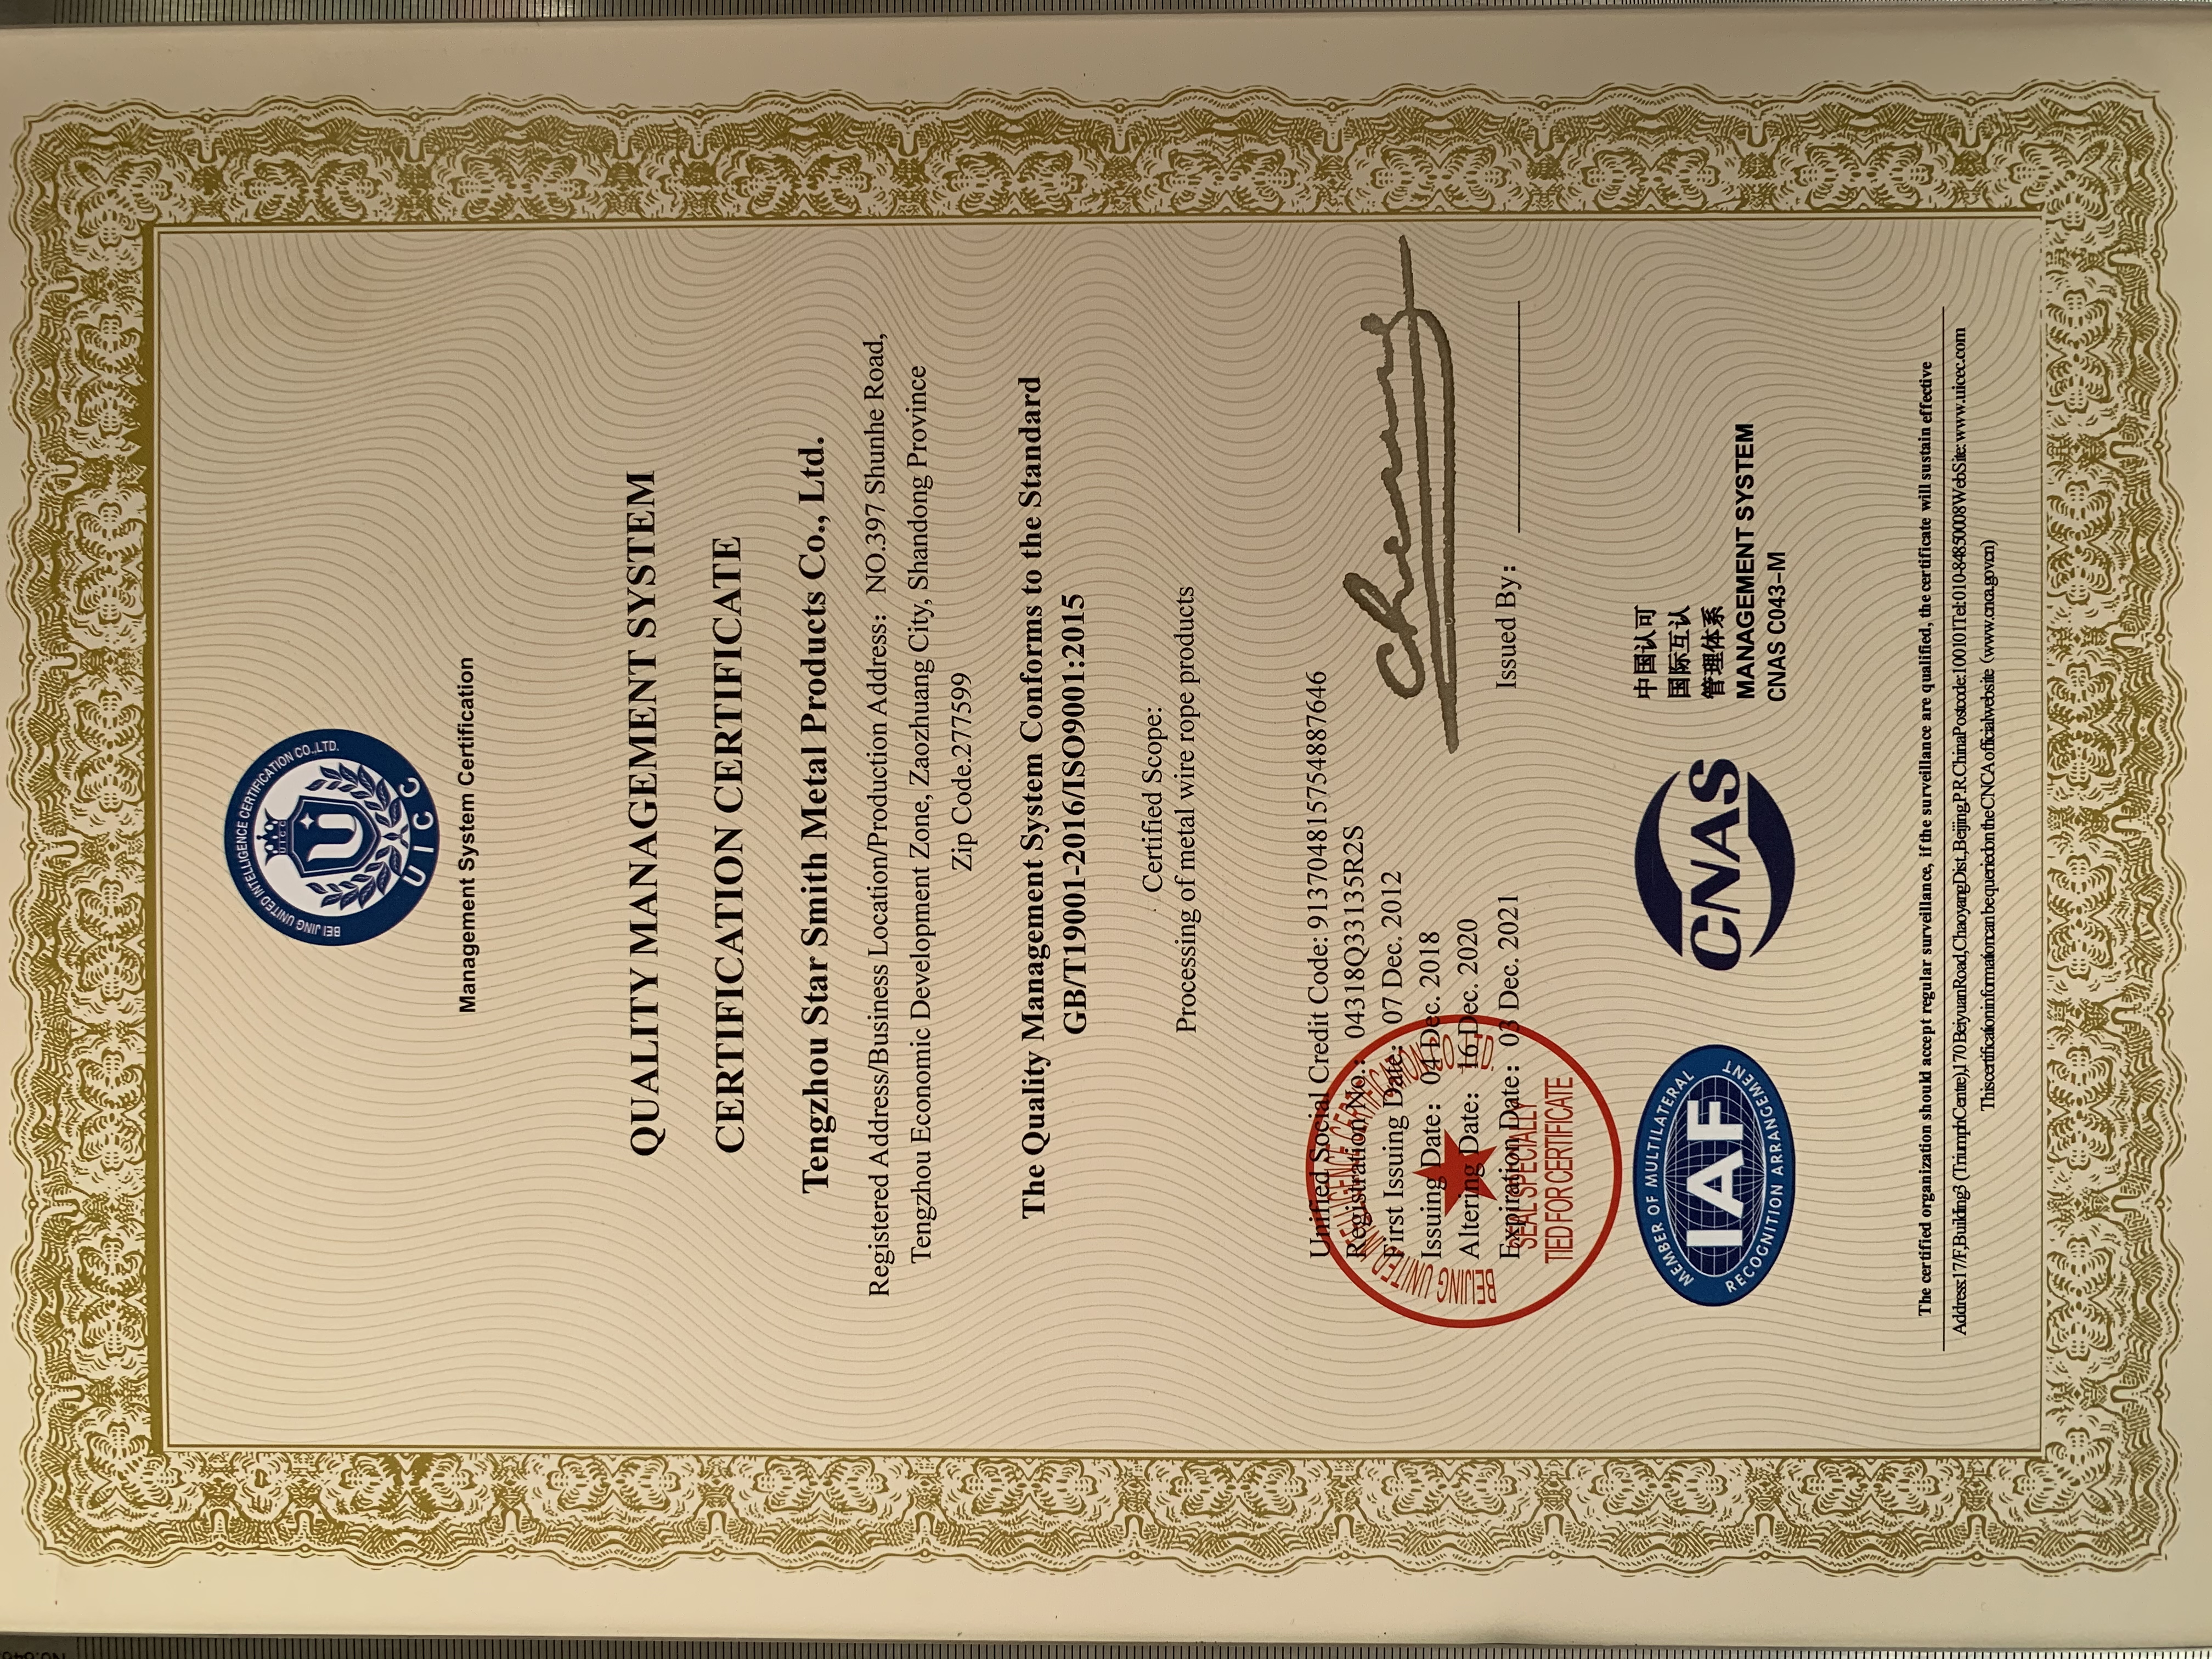 QUALITY MANAGEMENT SYSTEMCERTIFICATION CERTIFICATE